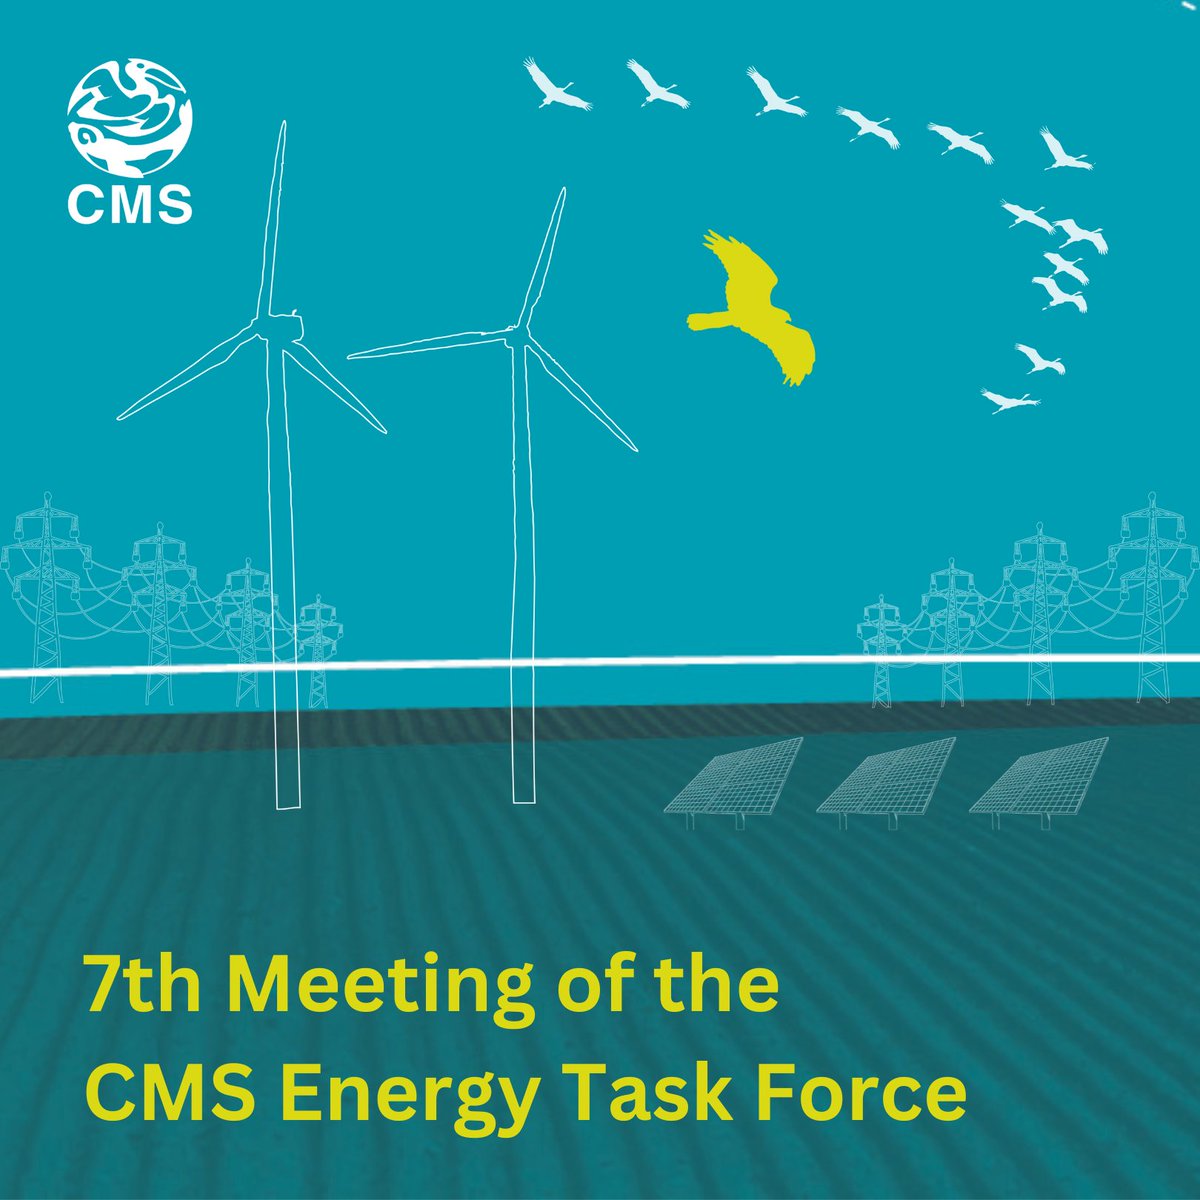 The planet needs energy that is good #ForNature! CMS Energy Task Force Meeting underway in Madrid, Spain. The ETF helps promote use of guidance and tools for the sustainable deployment of renewable energy! Learn more: cms.int/en/taskforce/e…